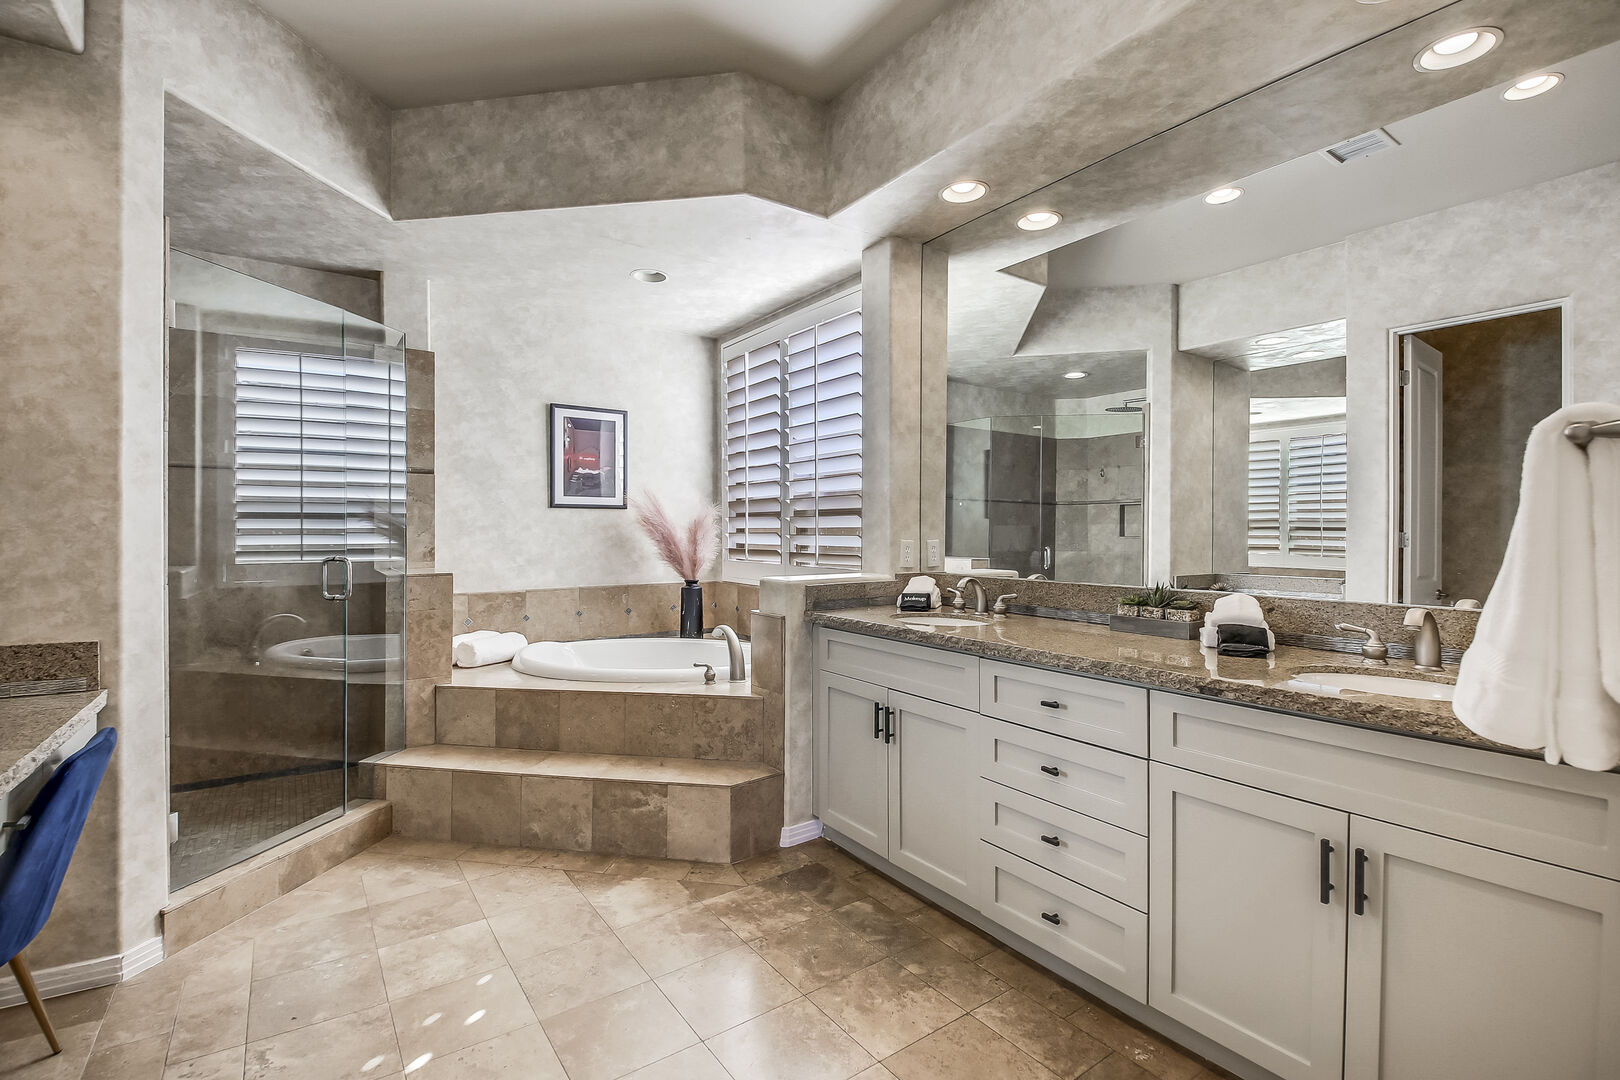 The private, en suite bathroom features a soaking tub and tile shower.